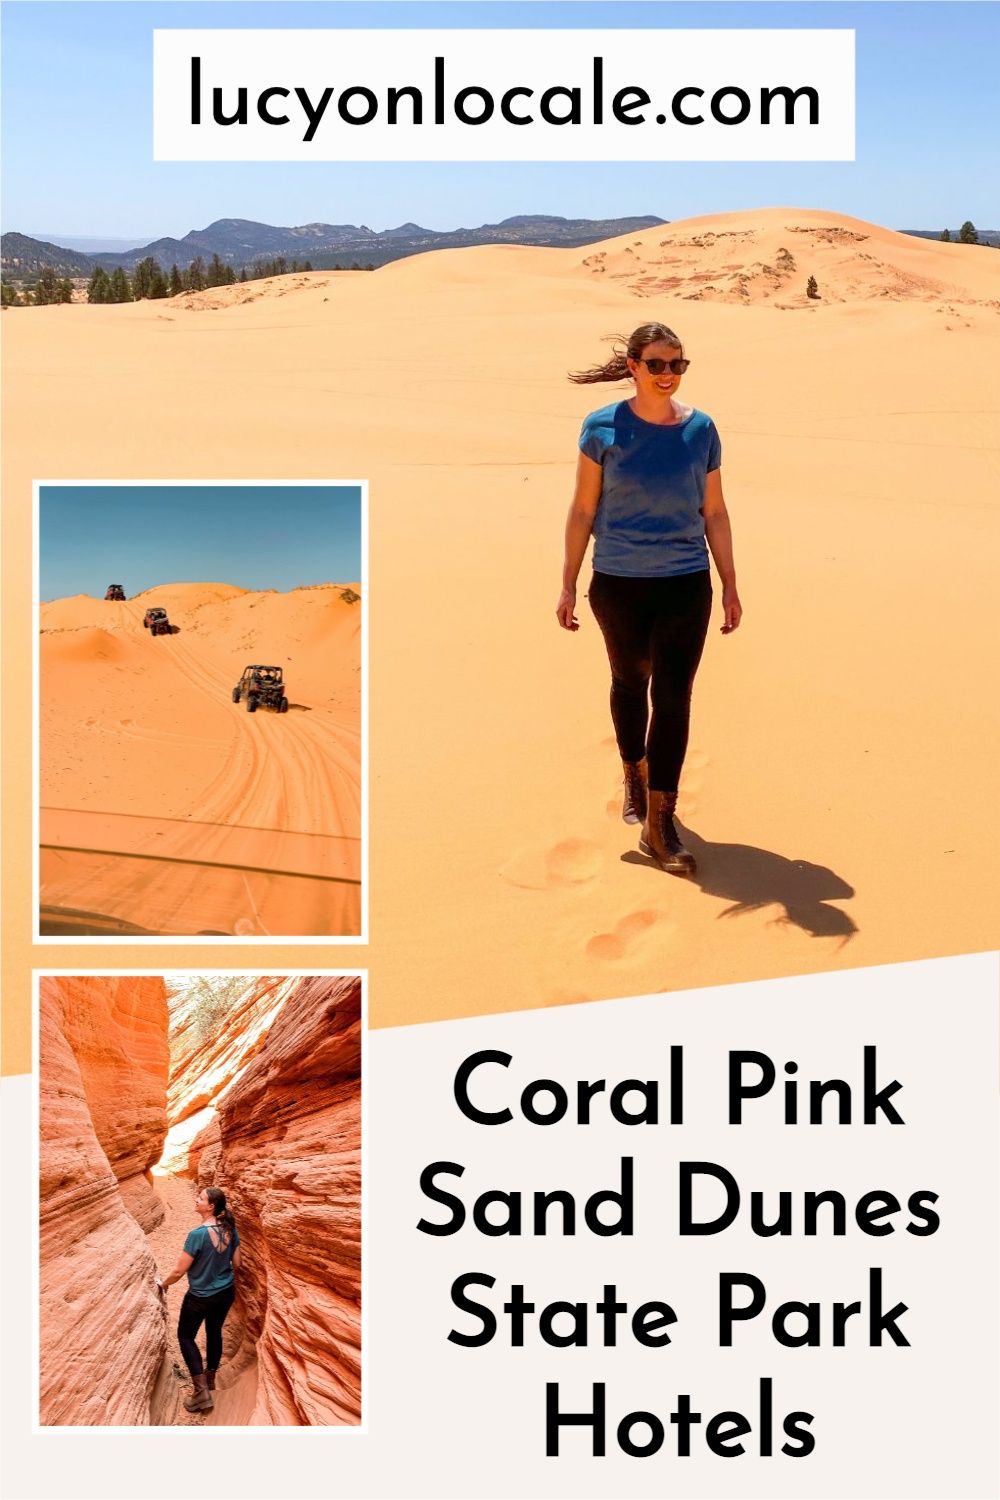 Coral Pink Sand Dunes State Park Hotels